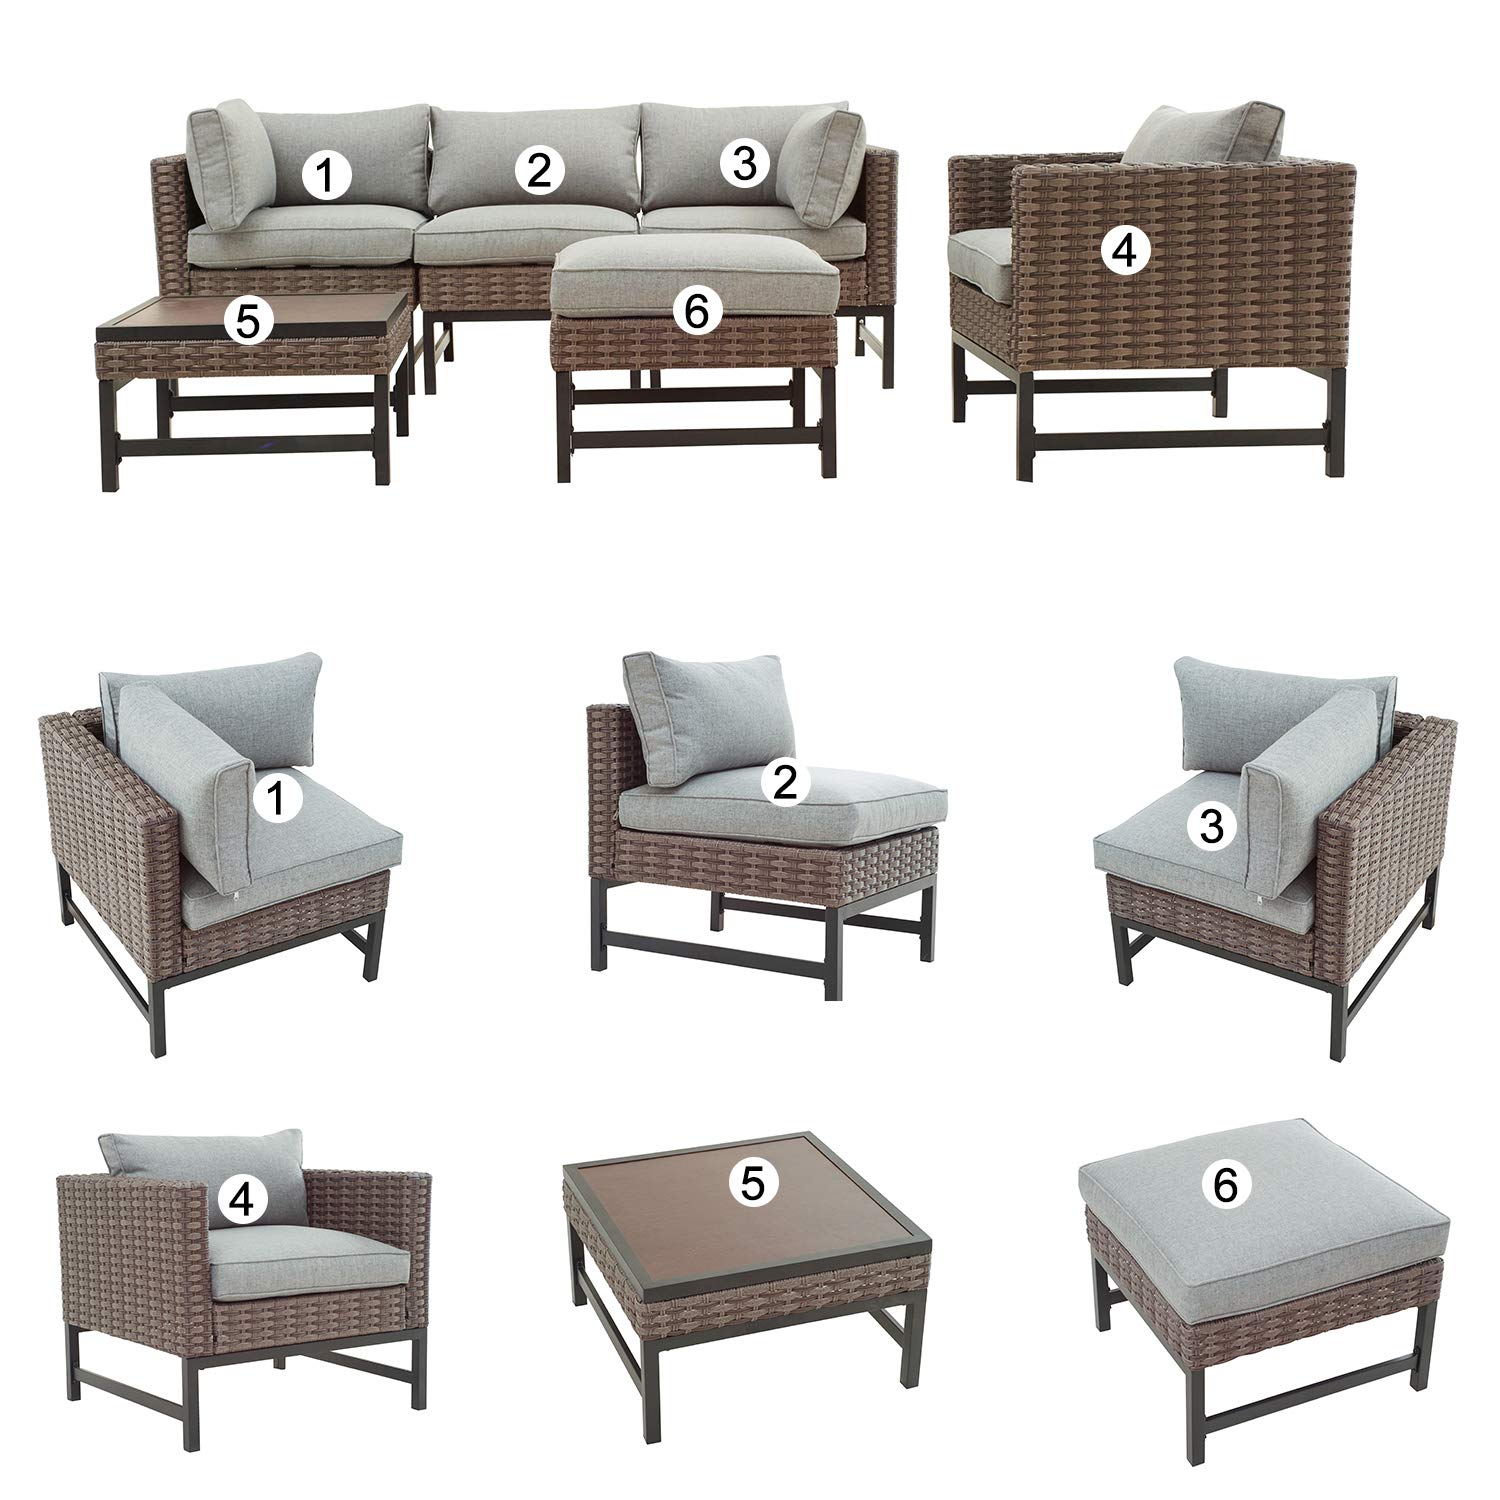 Festival Depot 6pc Patio Conversation Set Sectional Corner Sofa Set Outdoor All-Weather Wicker Metal Chairs with Seating Back Cushions Side Coffee Table Ottoman Garden Poolside,Gray